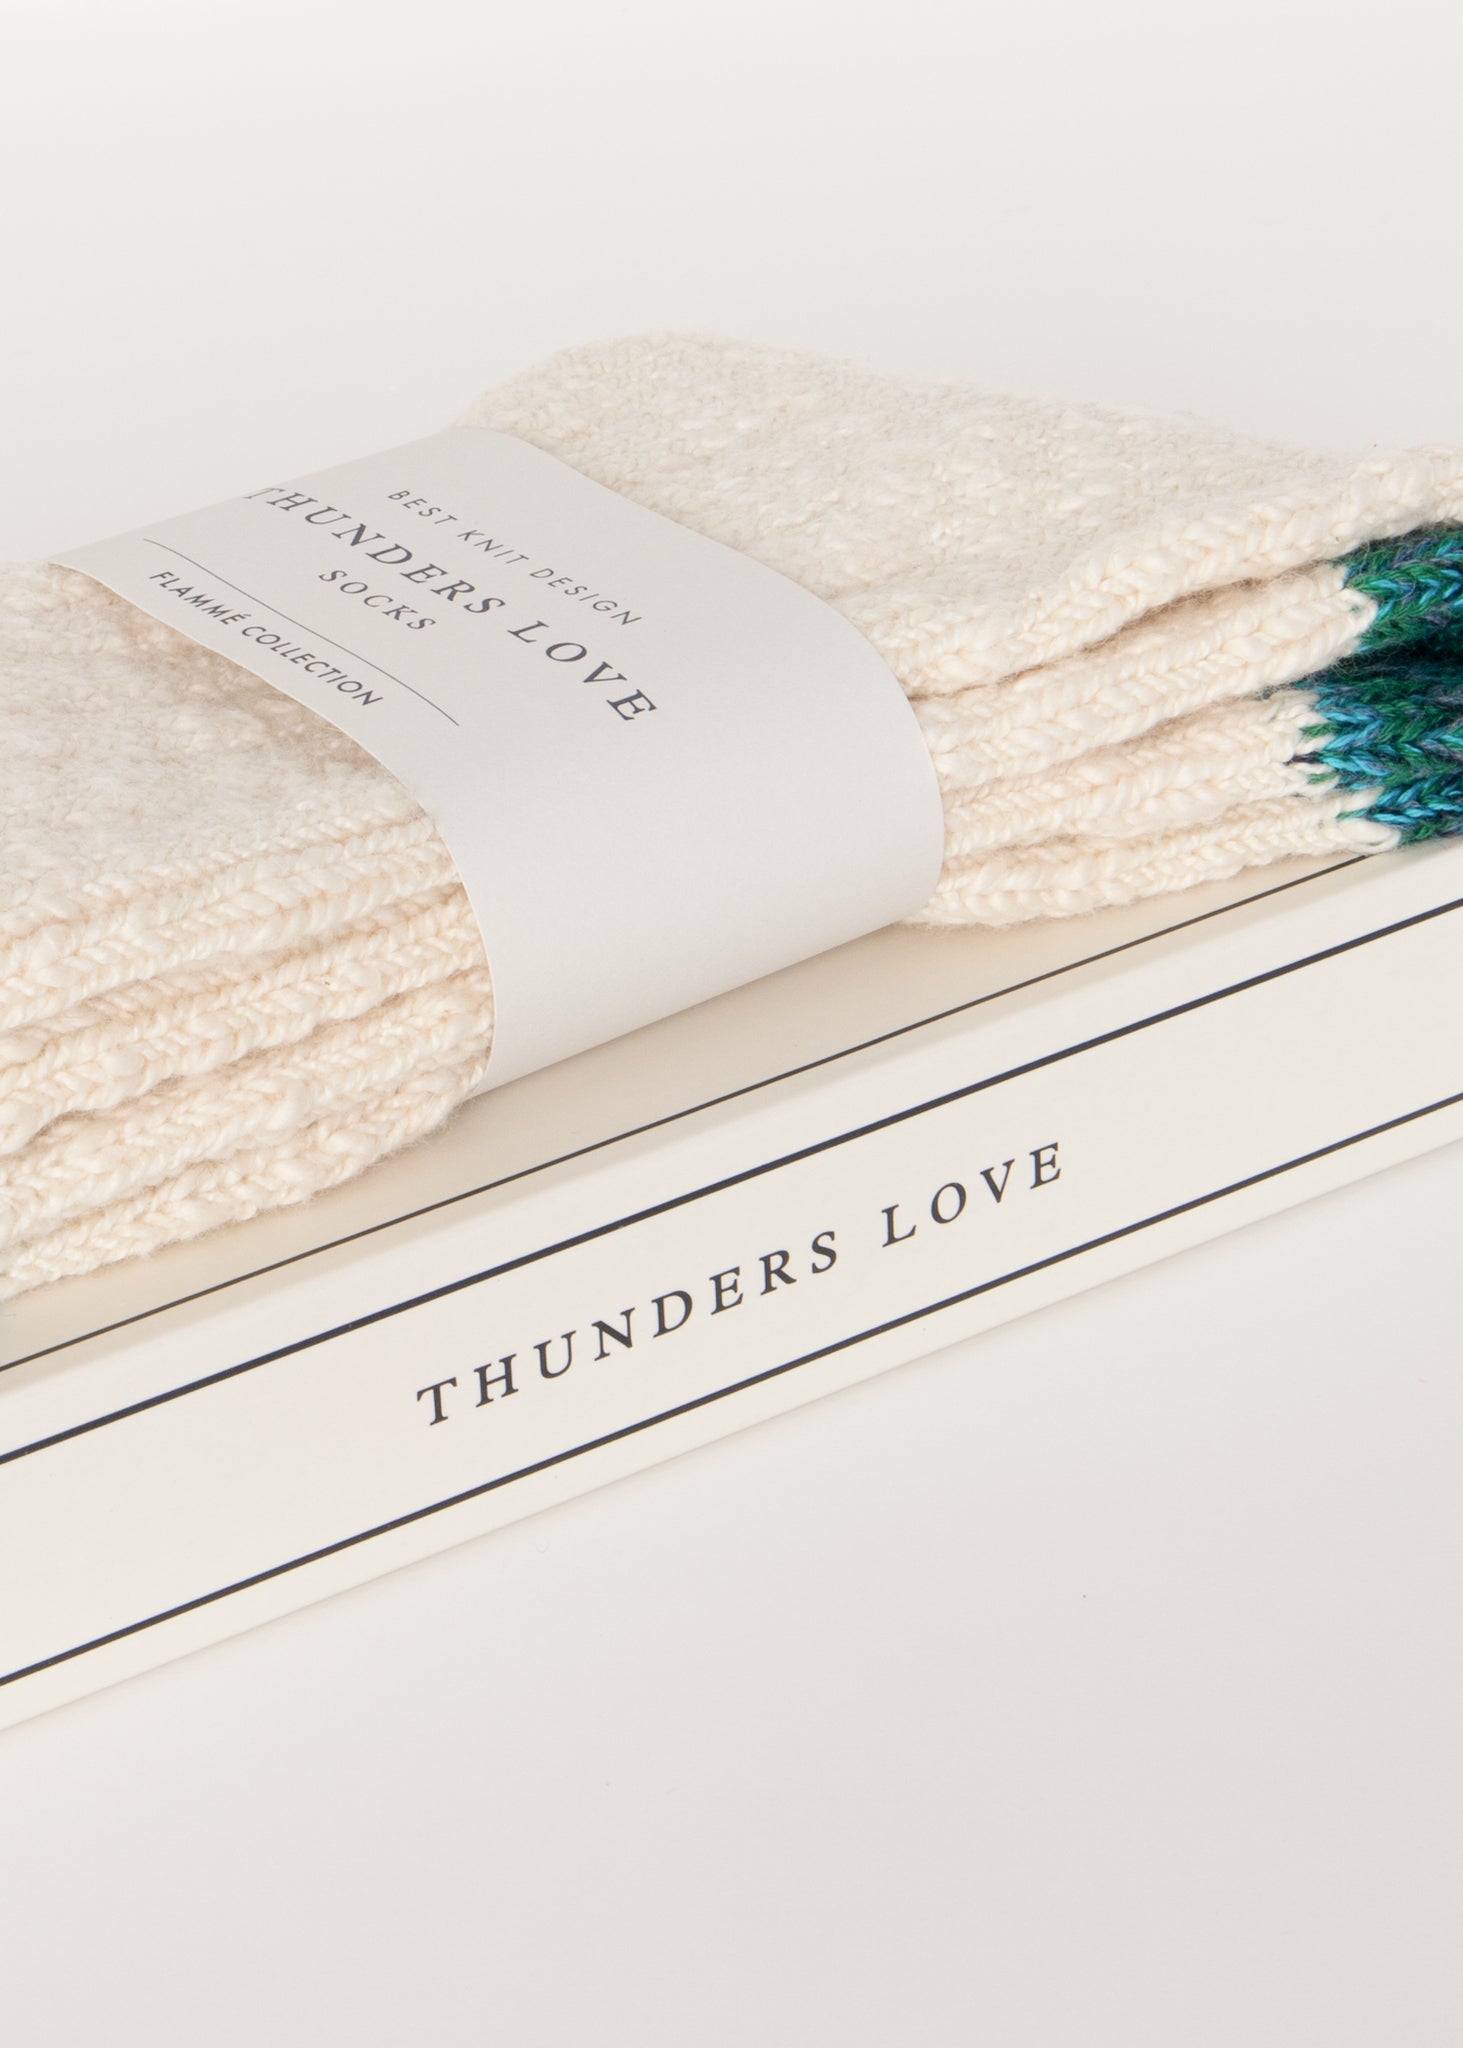 Thunders Love Flamme Raw White And Turquoise Socks